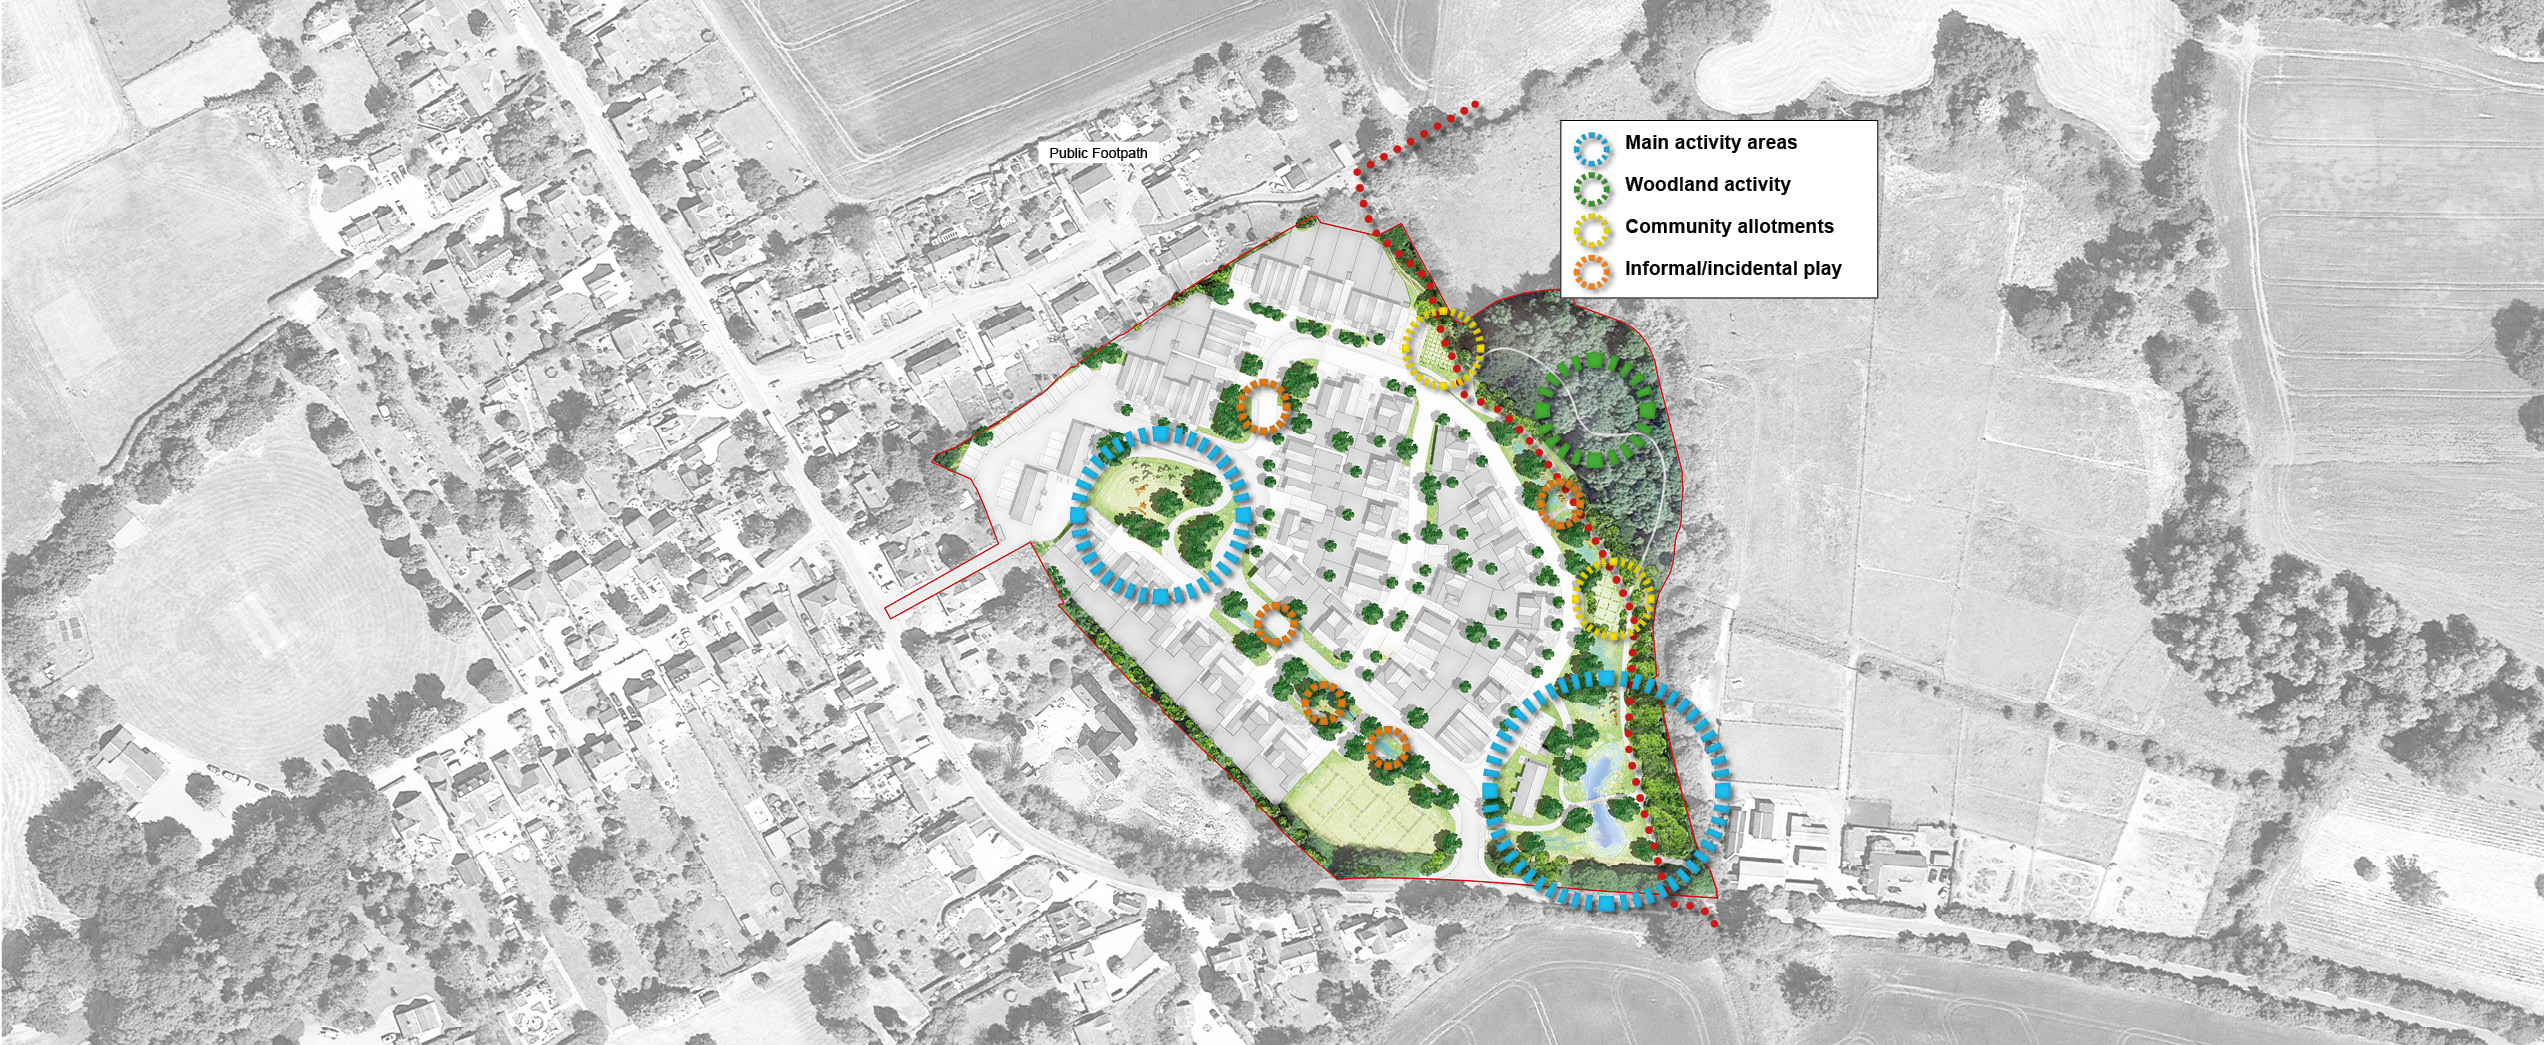 he proposal for Little Easton is an excellent example of a landscape-led scheme. It starts by taking the land and its surroundings into account and then evolves in collaboration with the architectural design. The outcome is a scheme that includes 44 residential units and 3 commercial units. It is designed in a way that is sensitive to its surrounding townscape and landscape and responds to the topography of the Upper Valleyside of the River Chelmer.